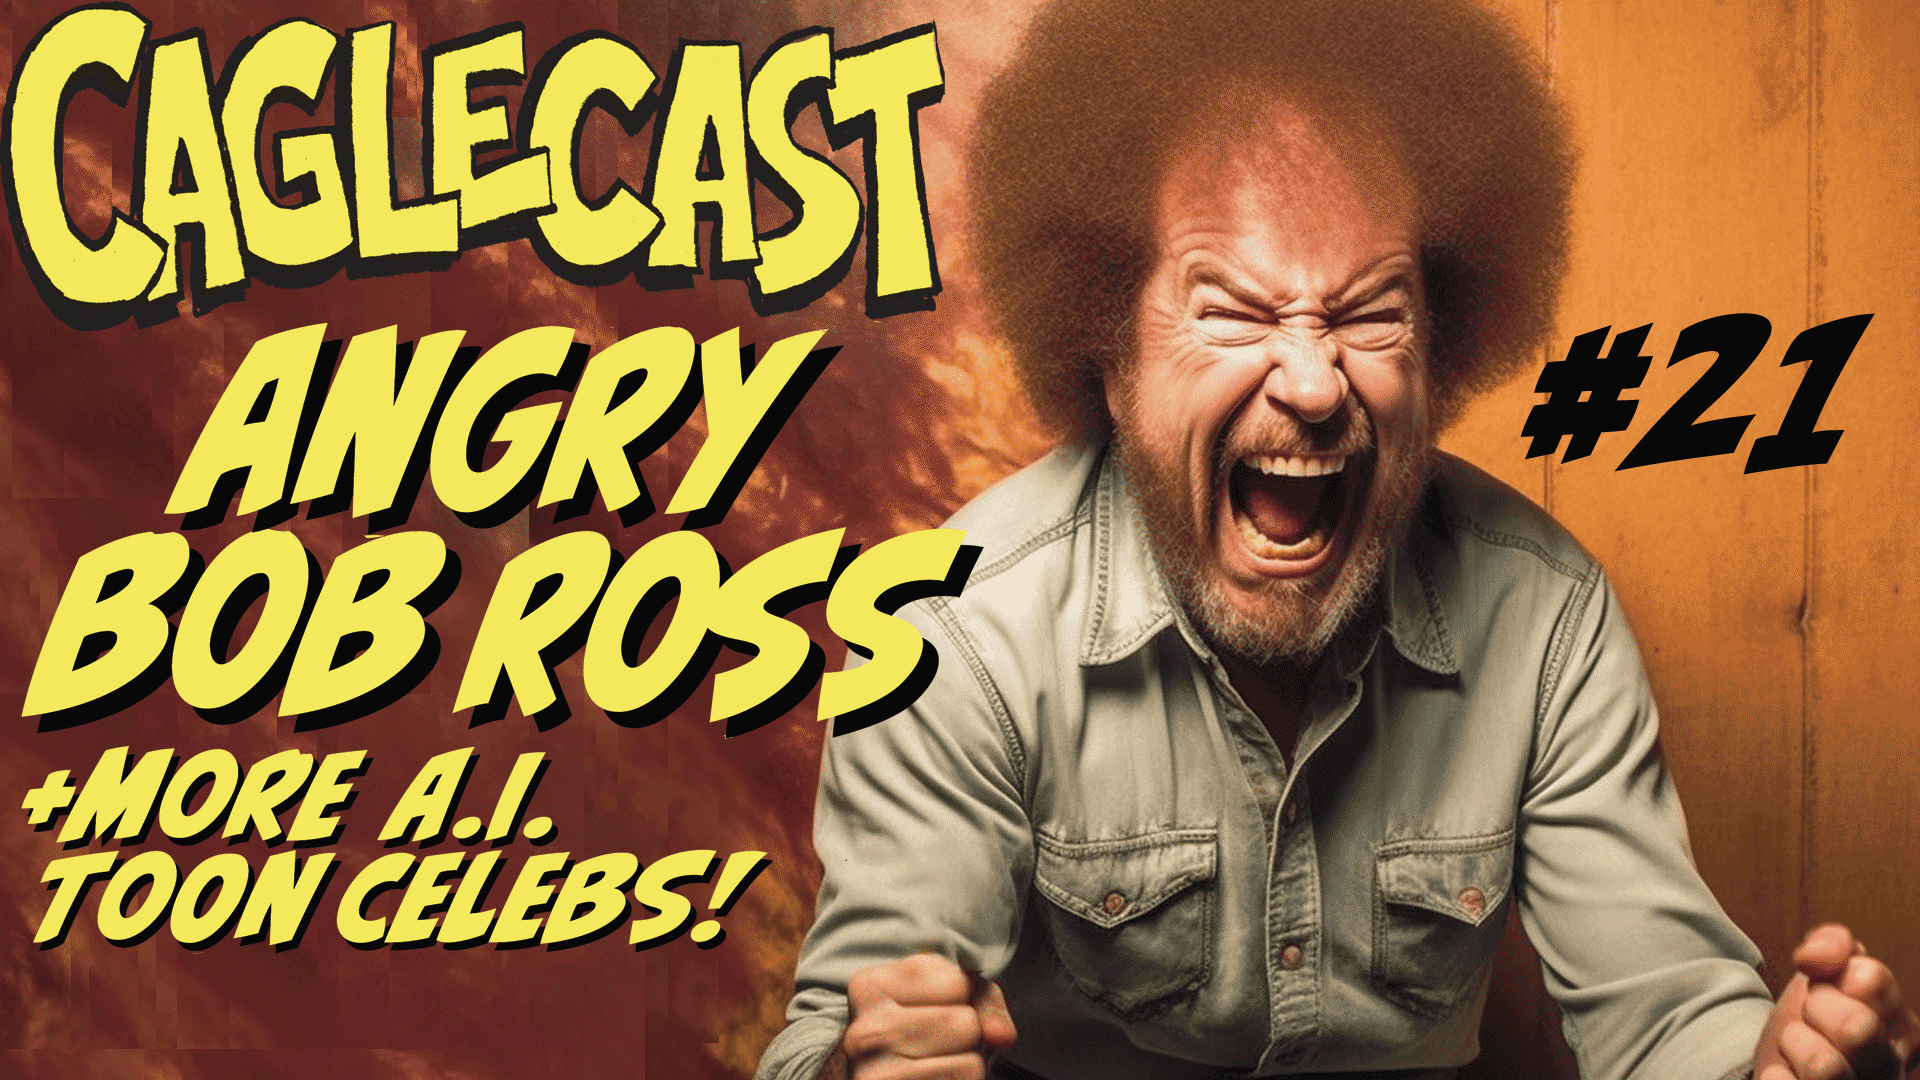 ANGRY BOB ROSS! Celebrities who are very funny and VERY ANGRY -- Generated by Artificial Intelligence! #21 poster